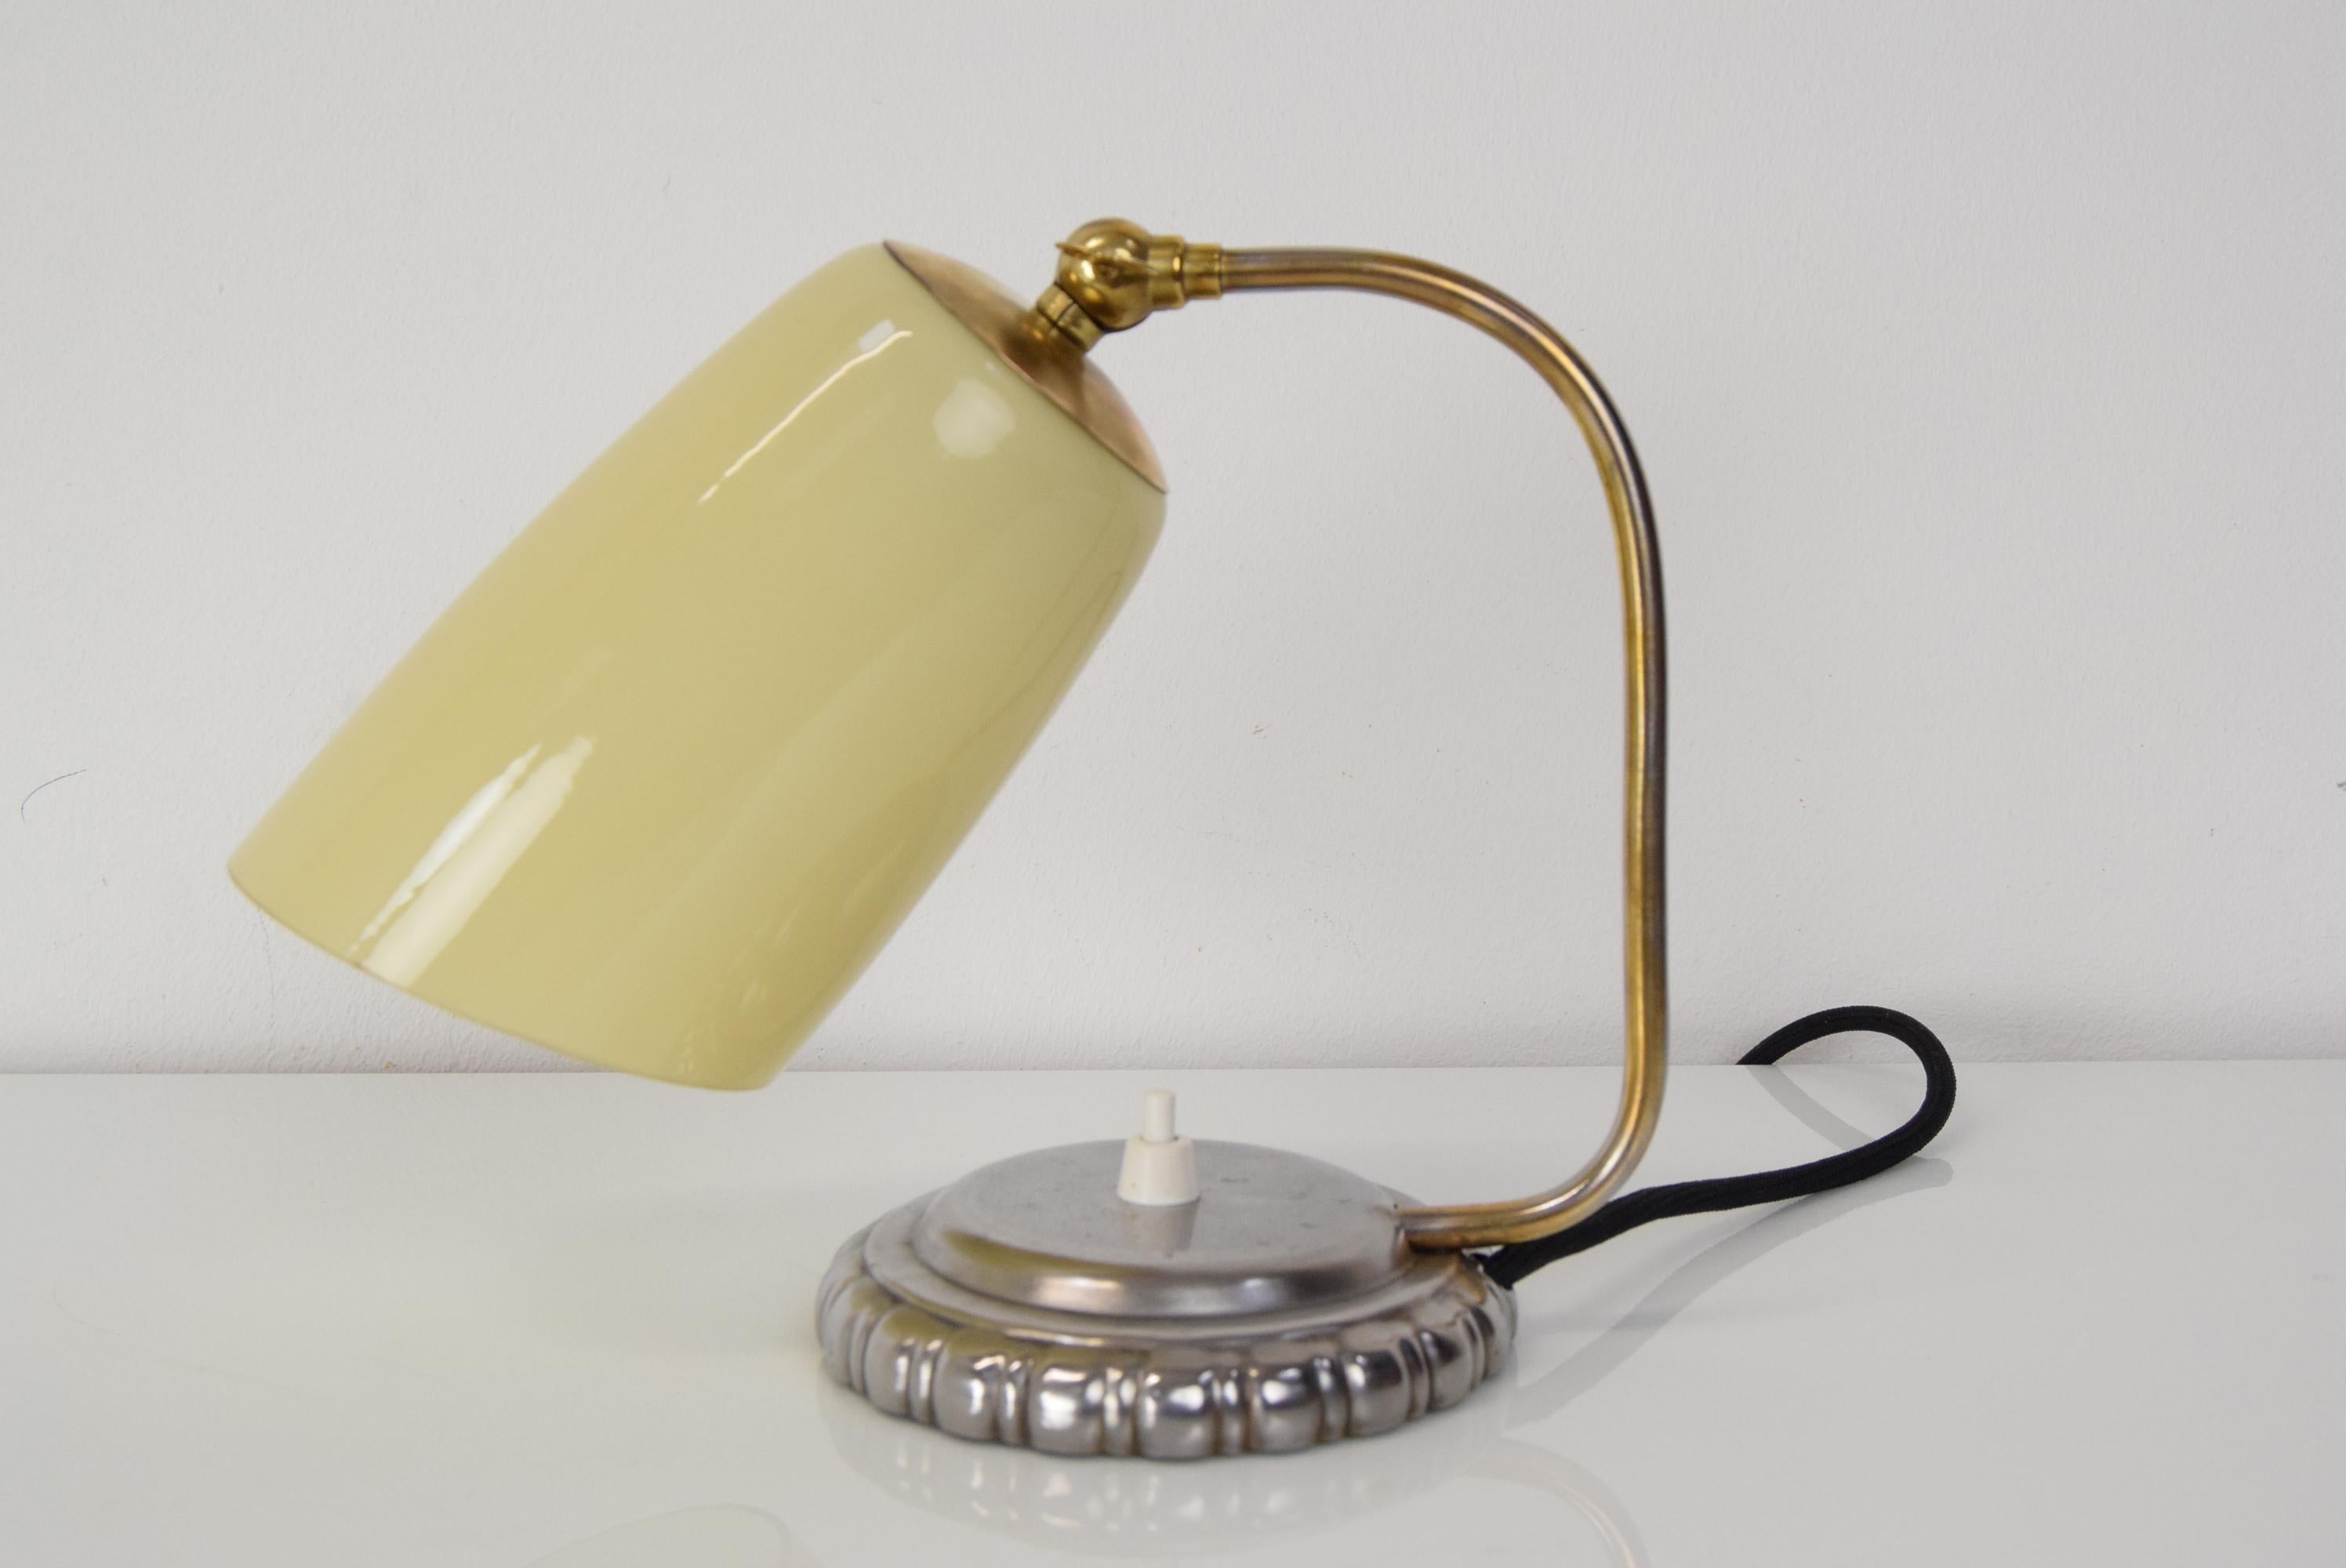 Made in Czechoslovakia
Made of glass, brass, metal.
With aged patina.
Adjustable shade.
Was installed new wiring.
1x,E27 or E26 bulb
Good original condition.
US adapter included.